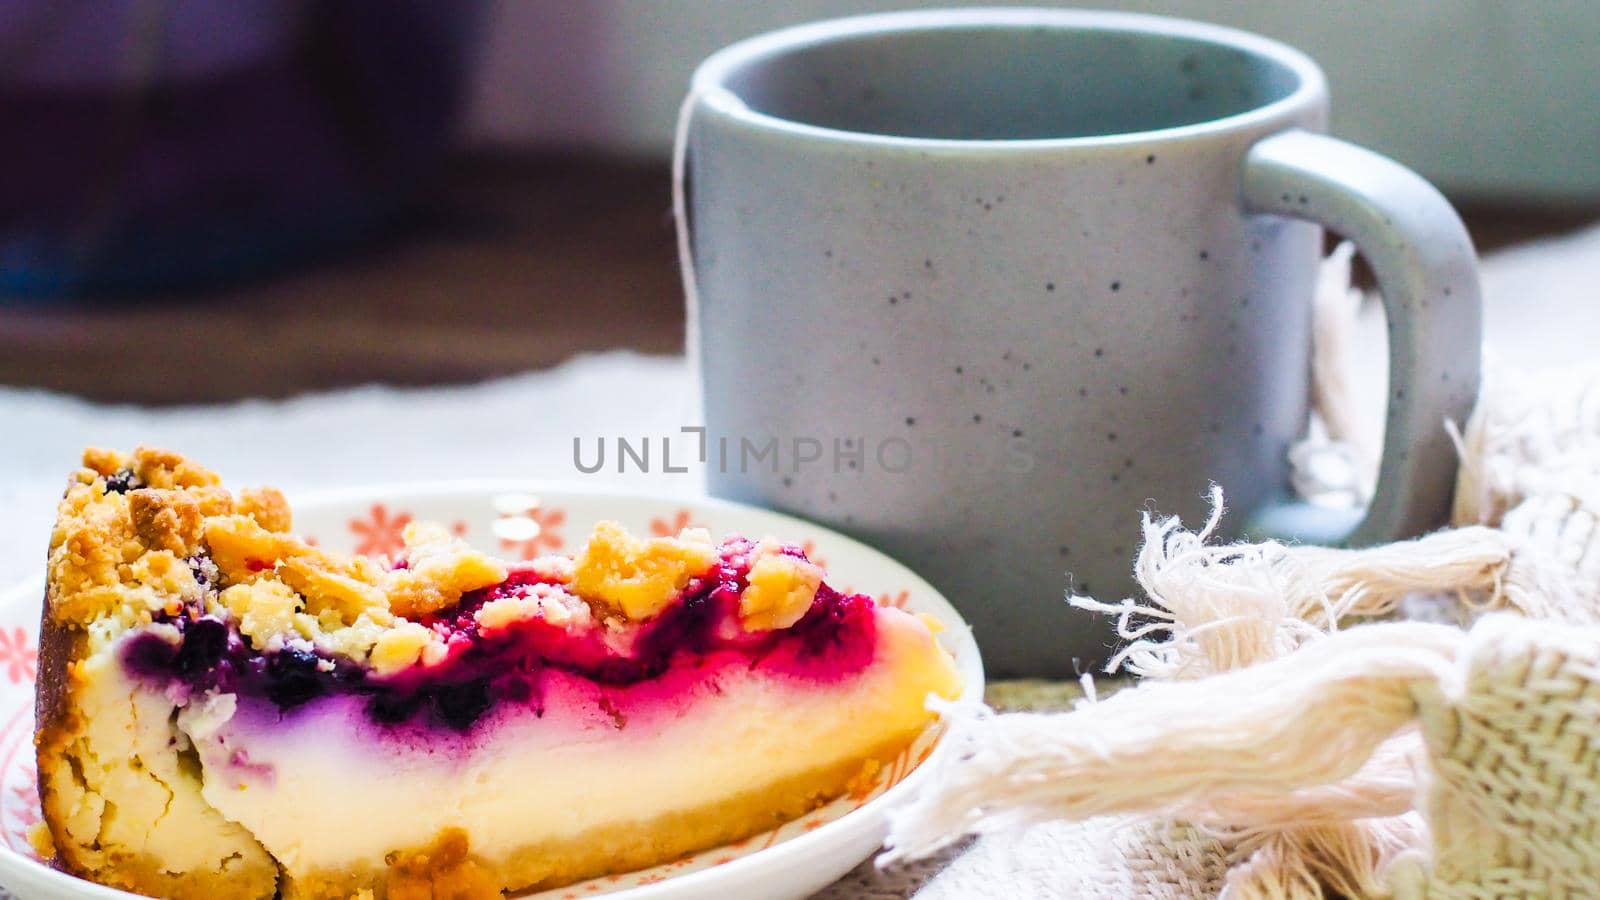 blueberry cheese cake on plate and a cup of coffee morning breakfast by Petrichor